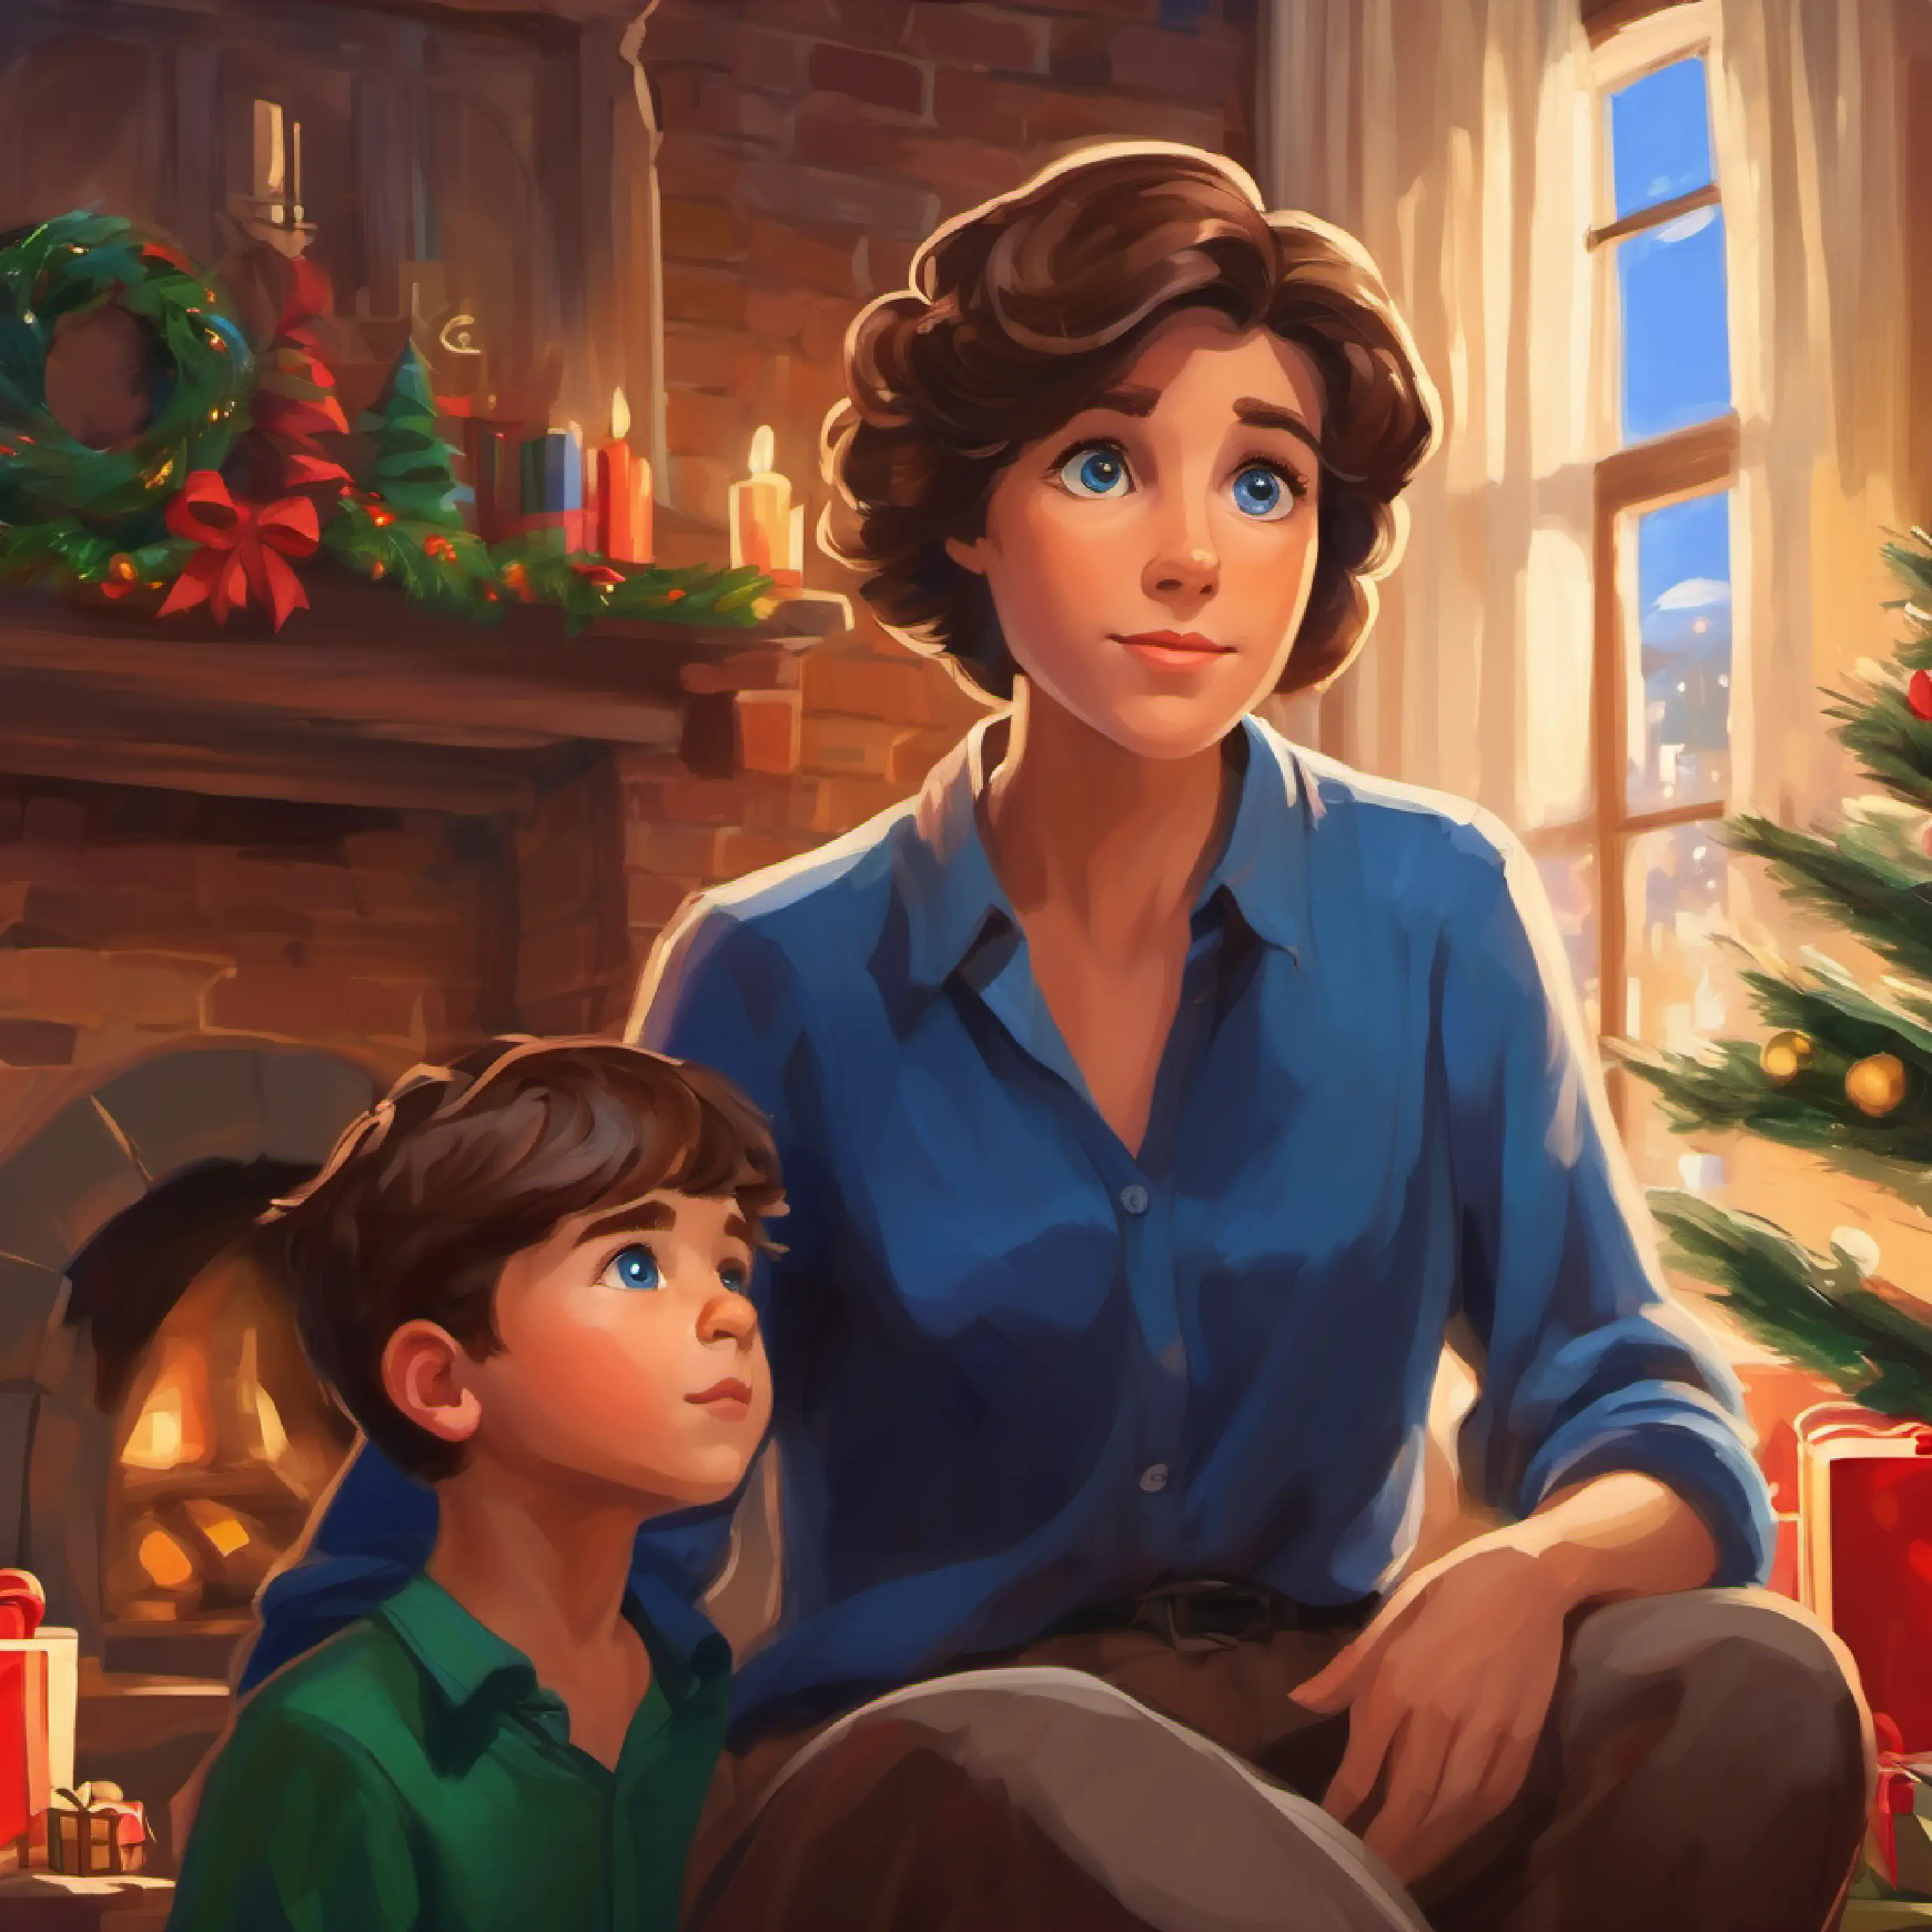 Family sheltering, mother acknowledges A curious, adventurous boy with brown hair and blue eyes's courage